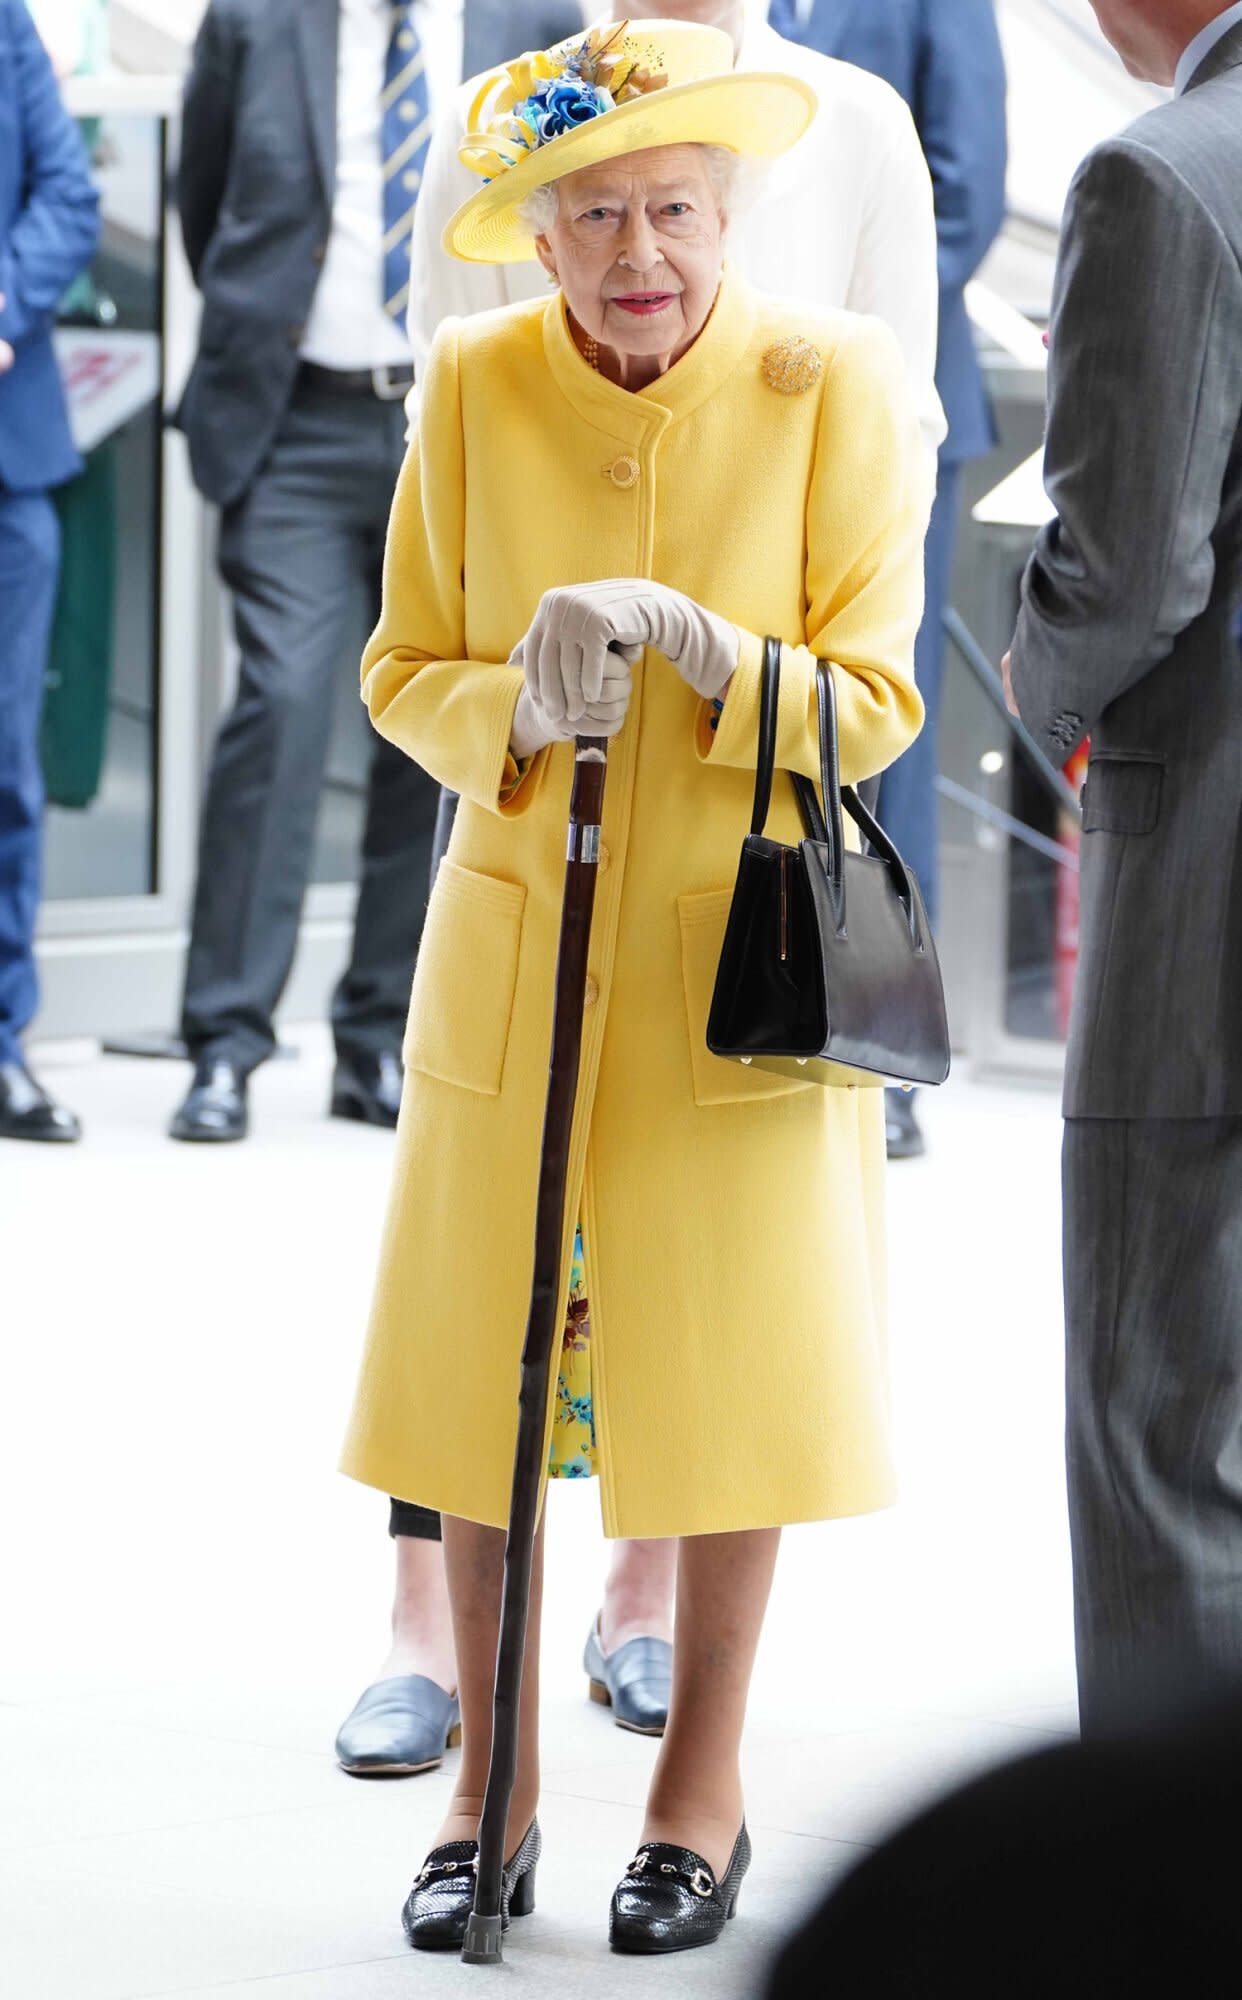 Queen Elizabeth II at Paddington station in London during a visit to mark the completion of London's Crossrail project